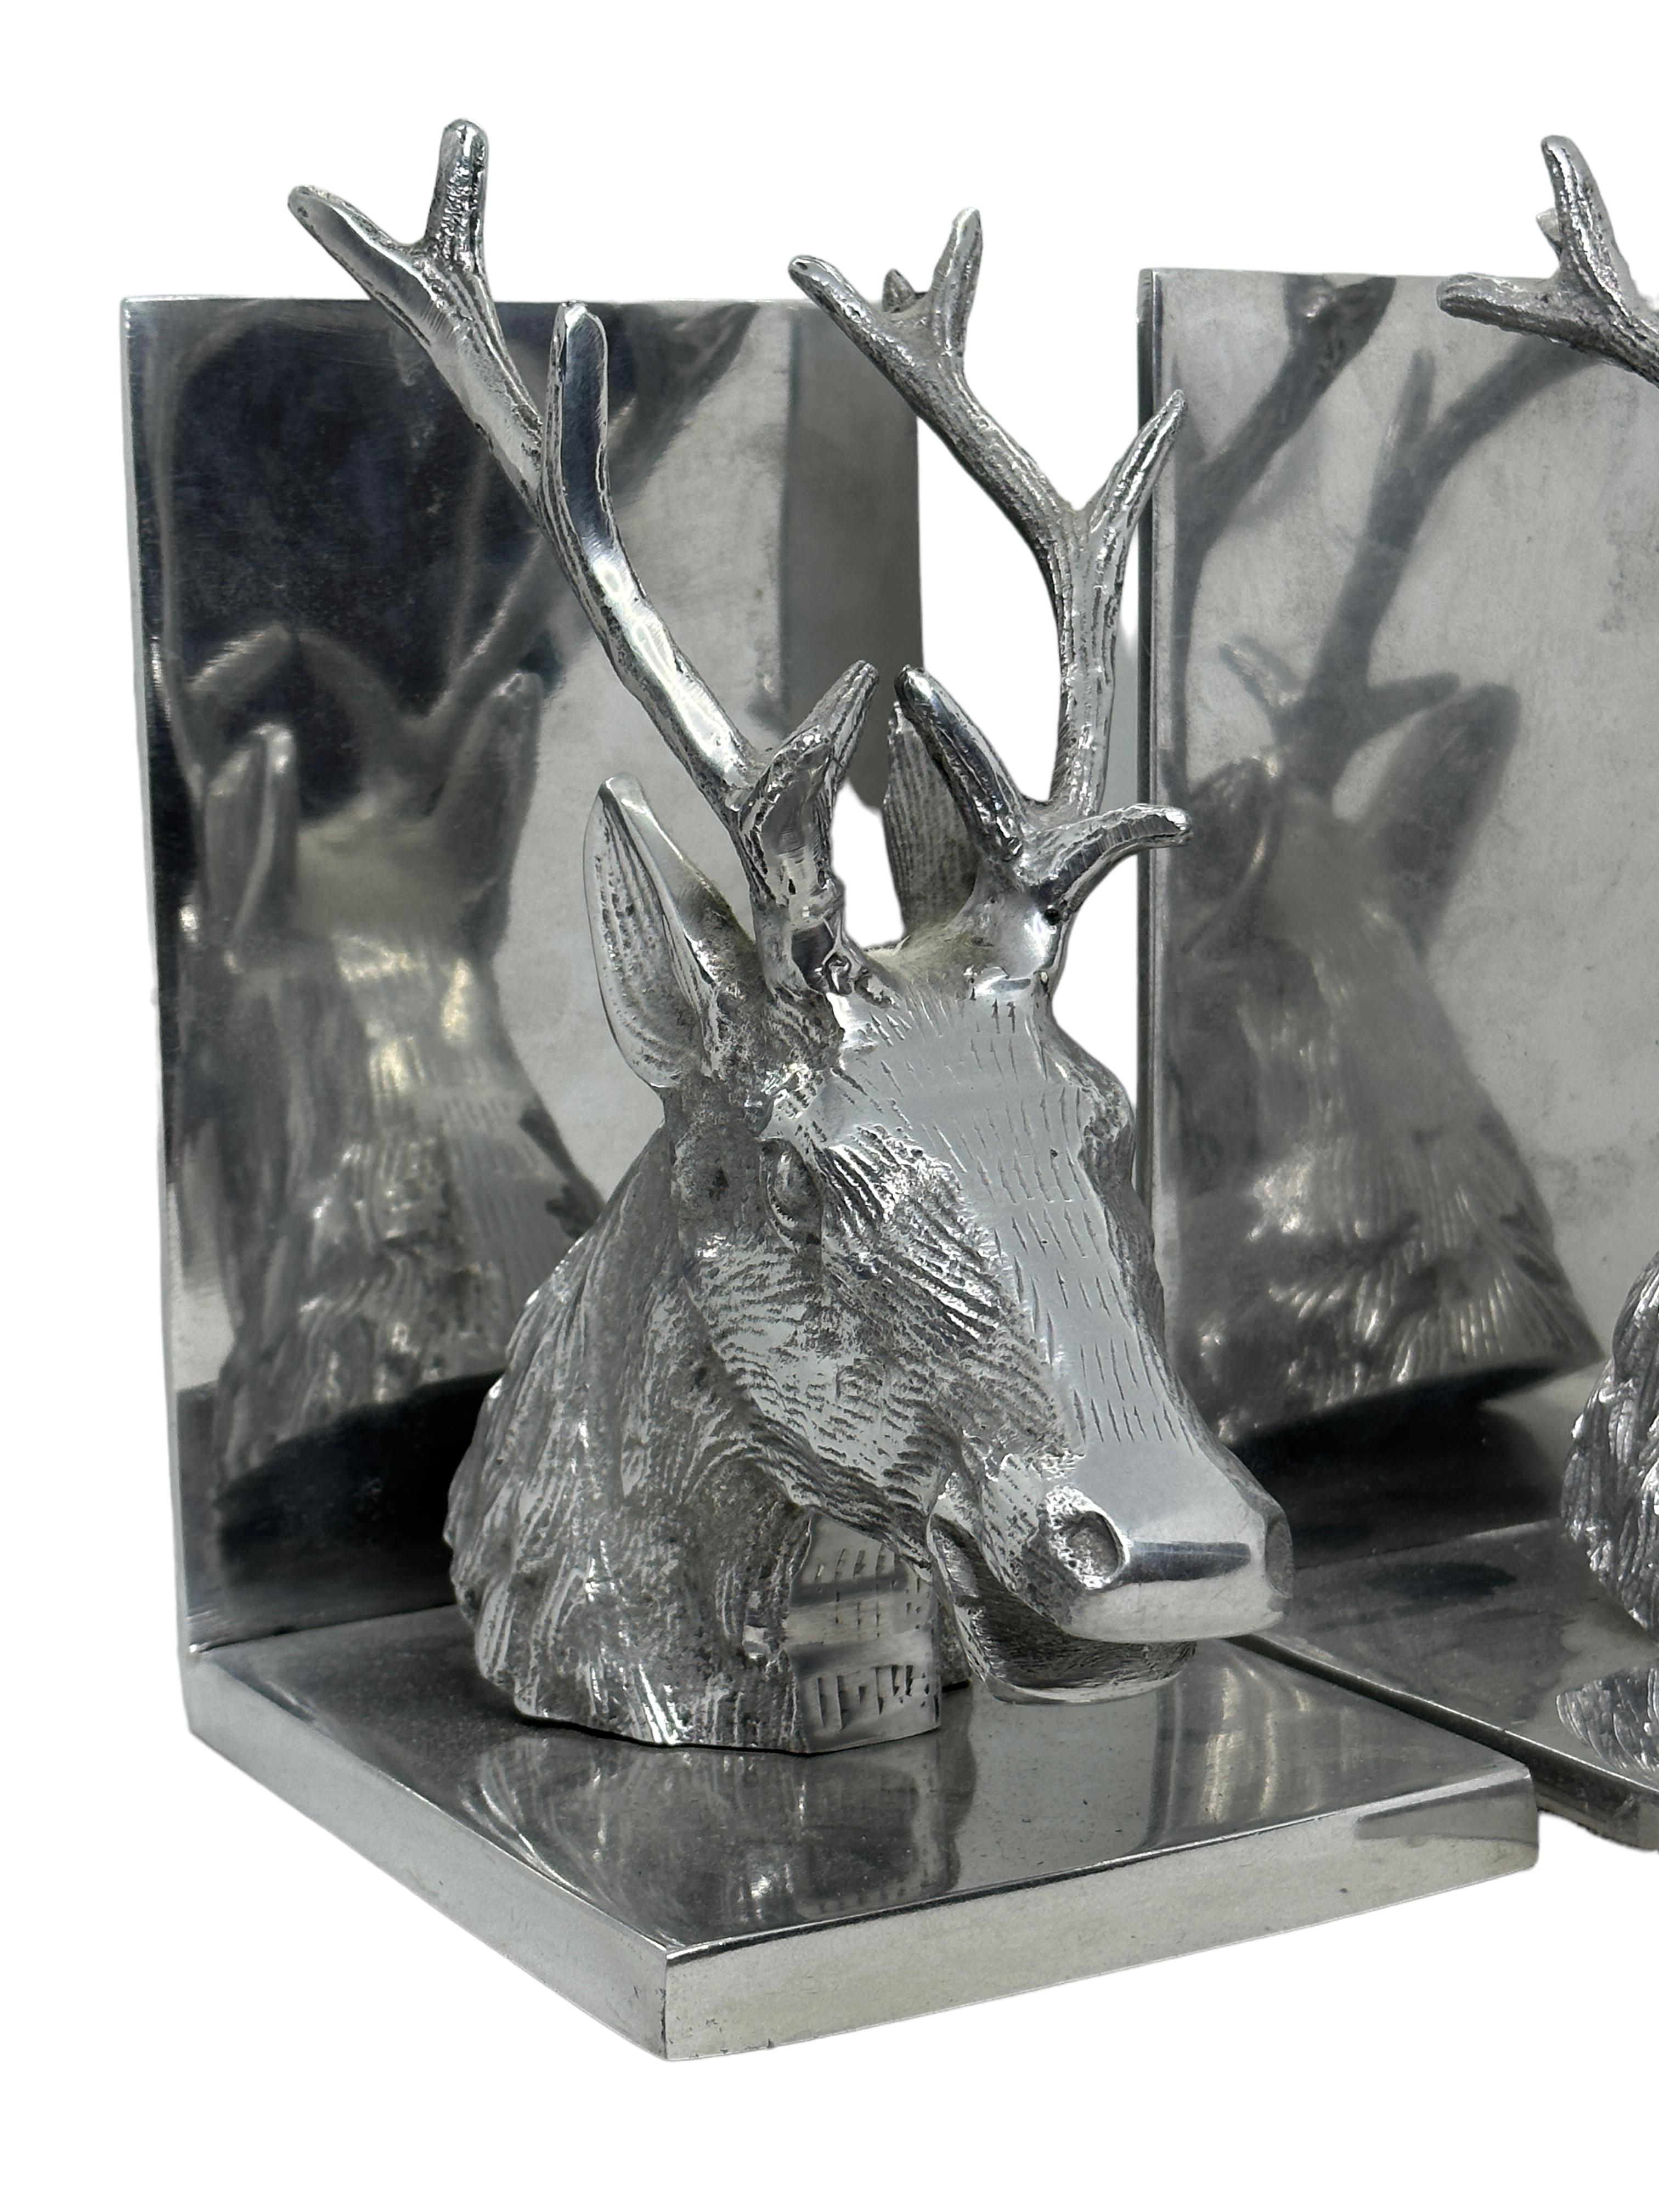 American Craftsman Pair of Vintage Polished Aluminum Deer Bookends, circa 1980s For Sale